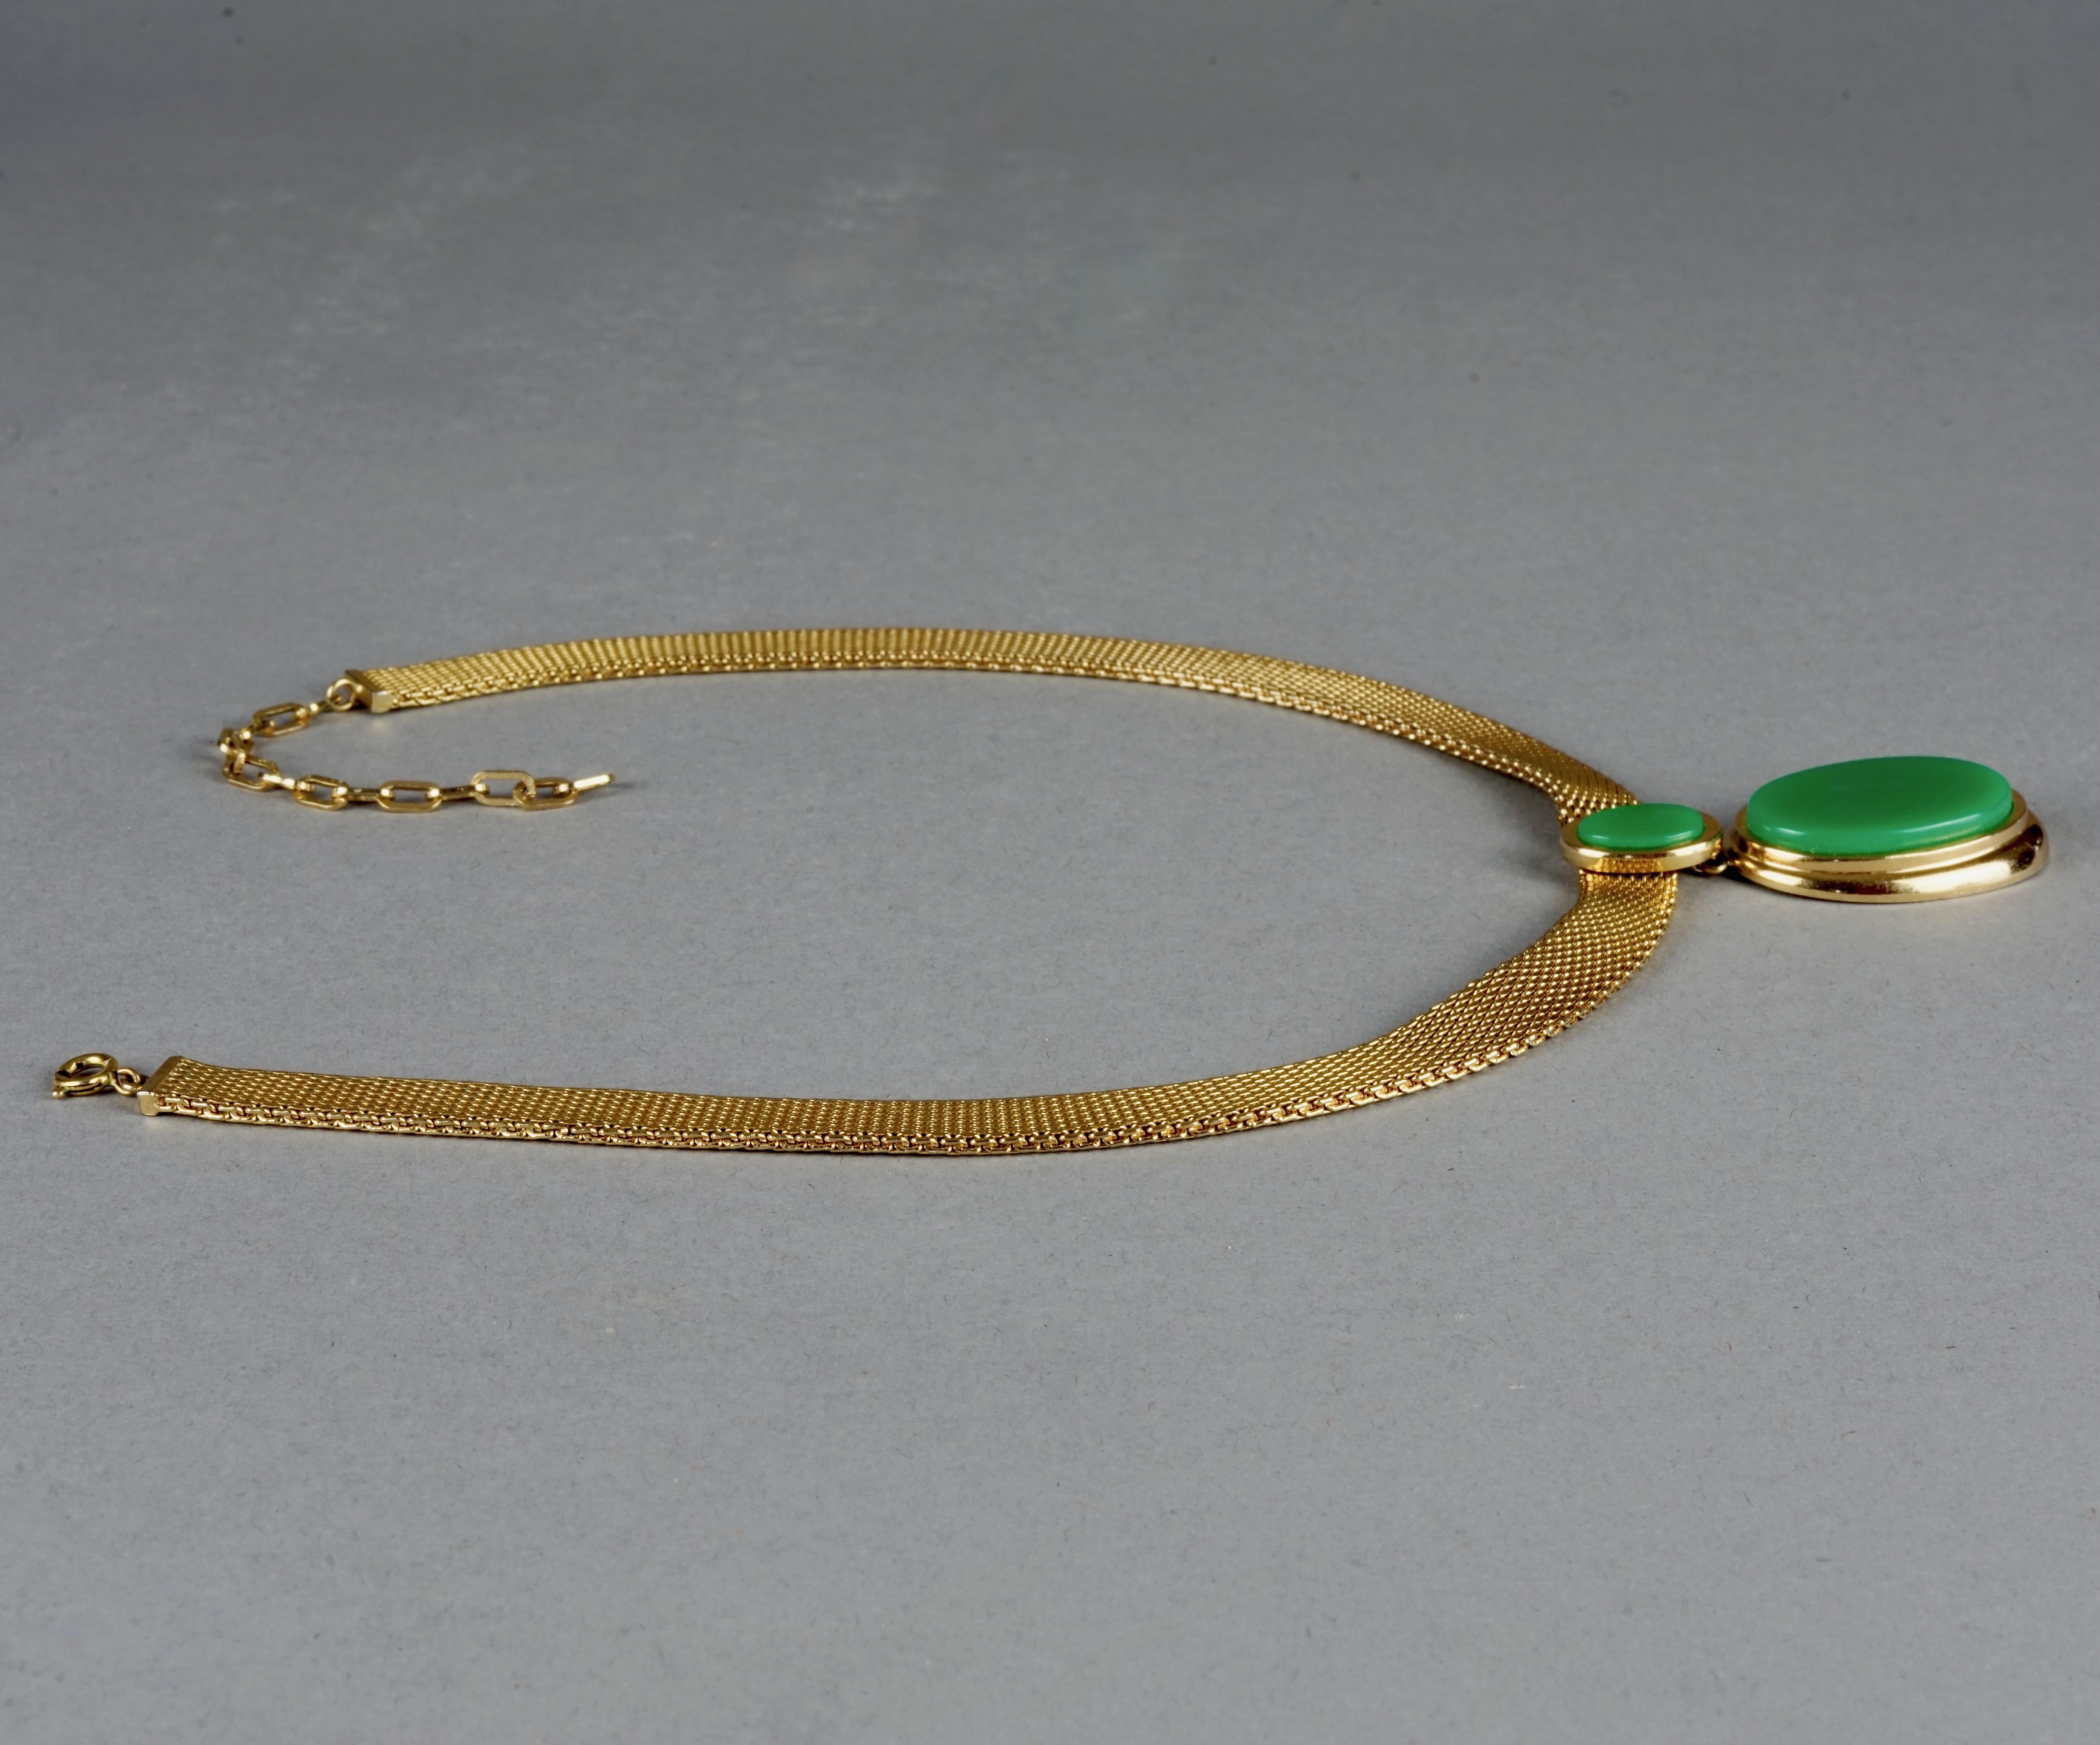 Vintage 1971 CHRISTIAN DIOR Double Oval Green Pendant Chain Necklace In Excellent Condition For Sale In Kingersheim, Alsace